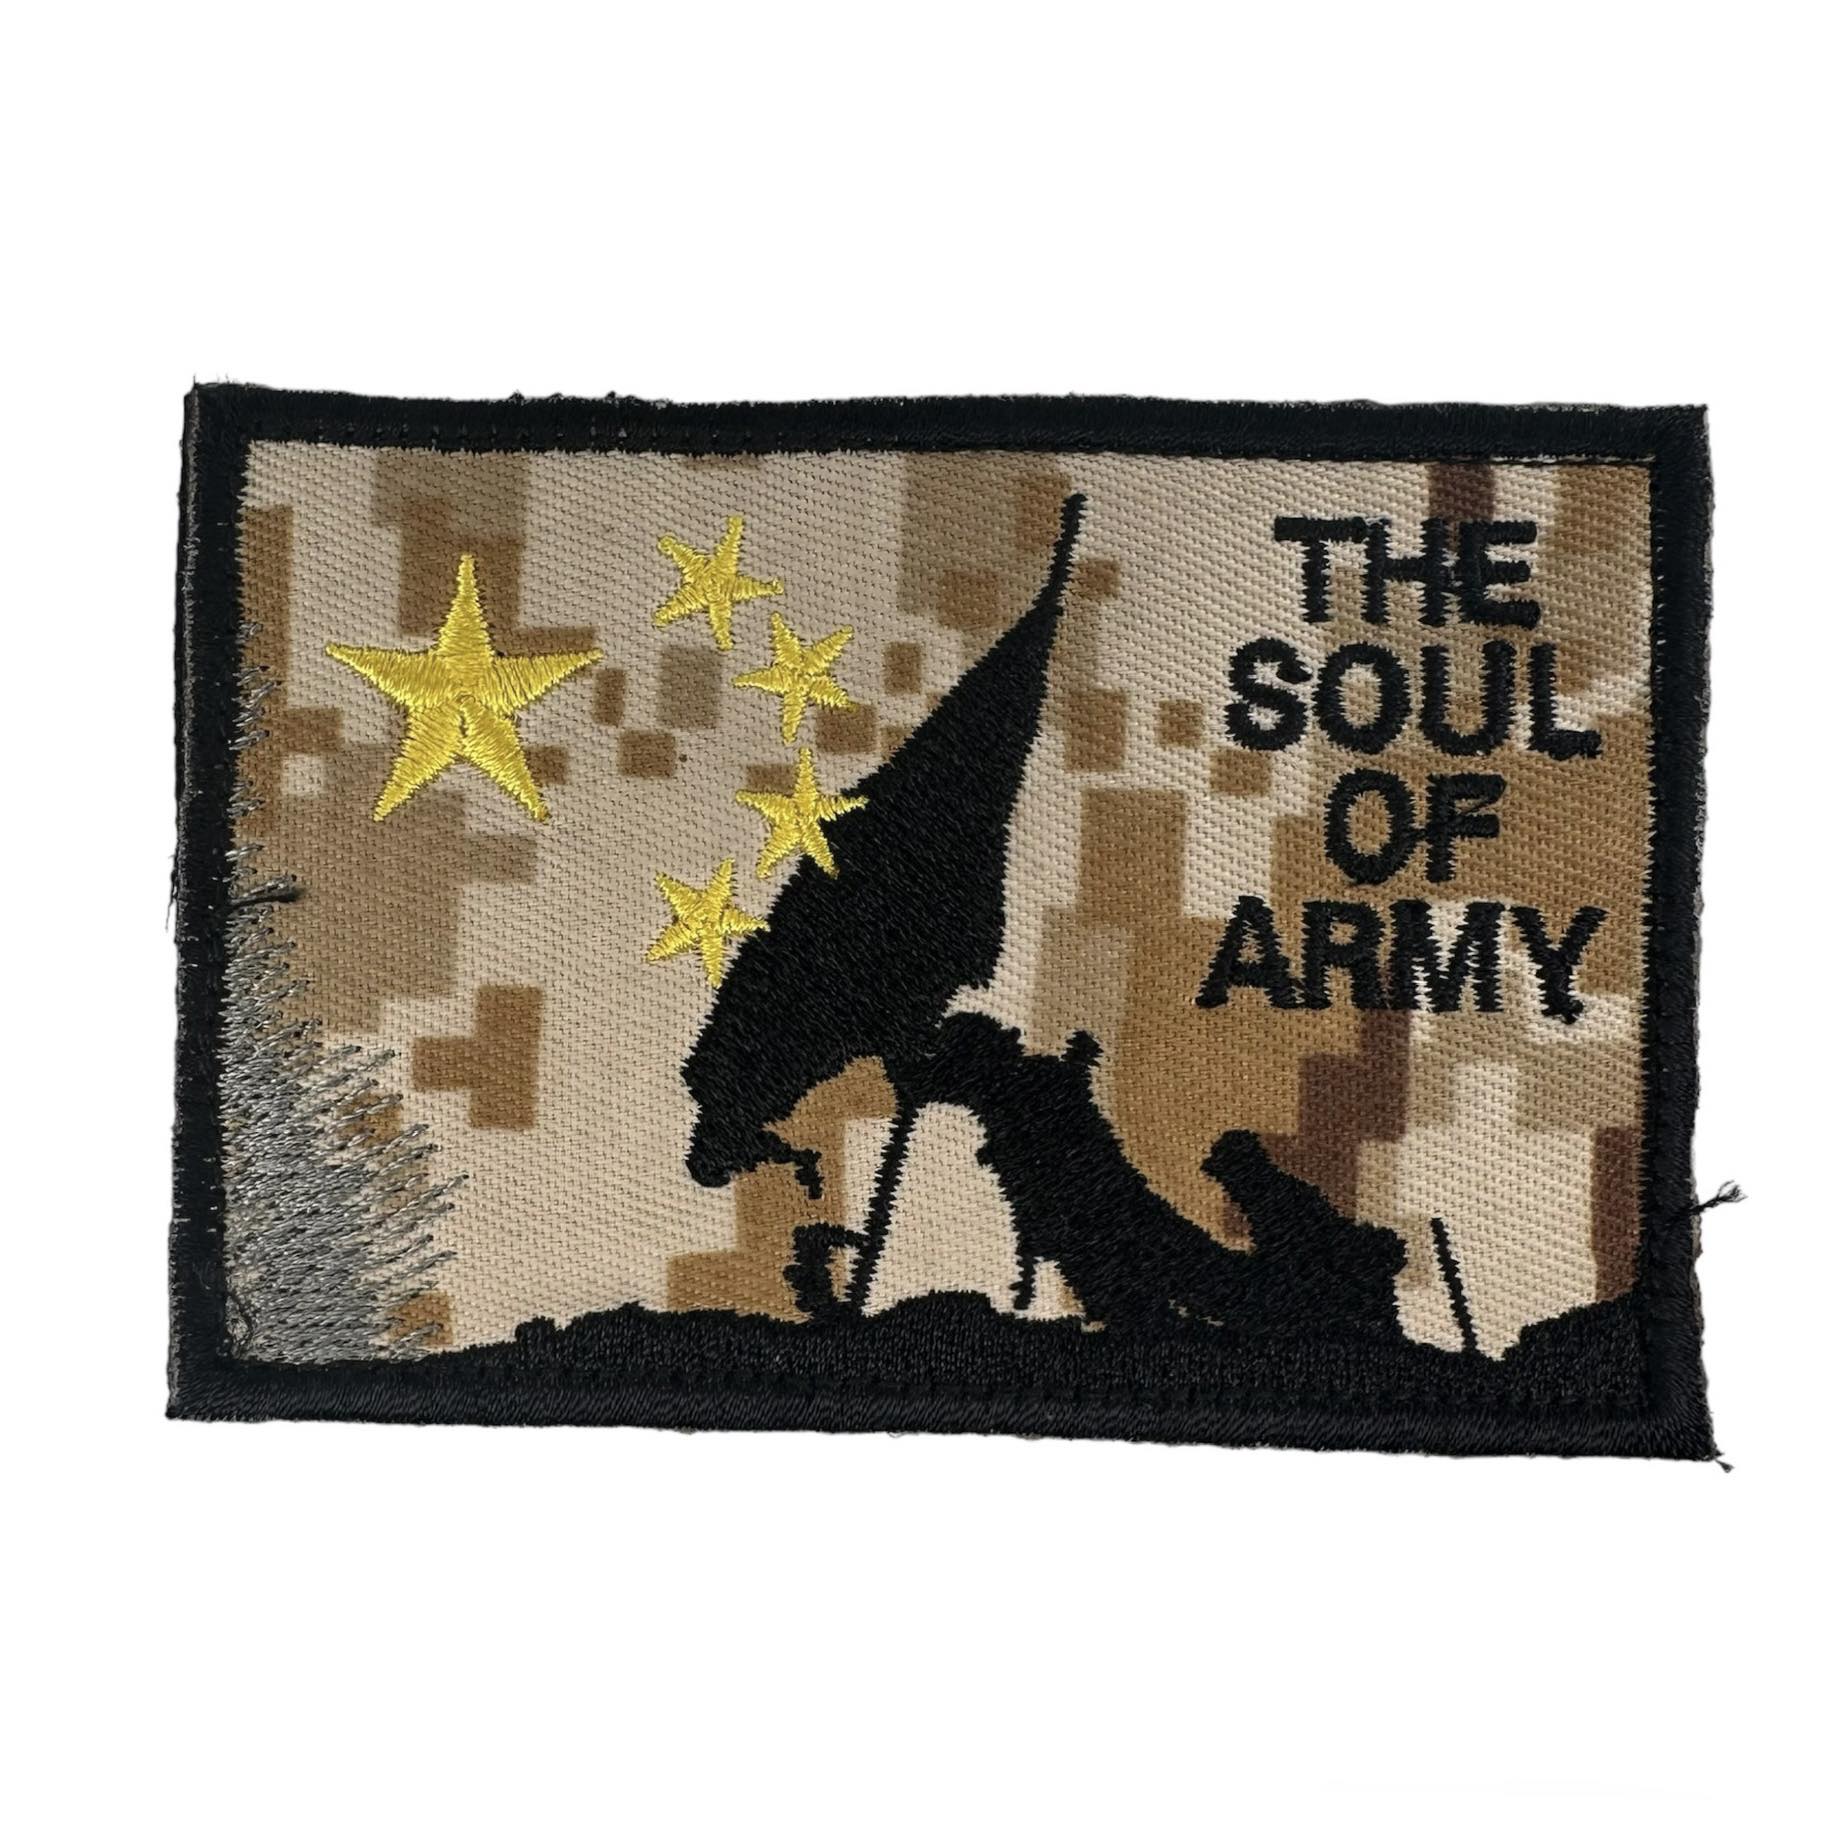 Embroidery Patch - The Sould of Army